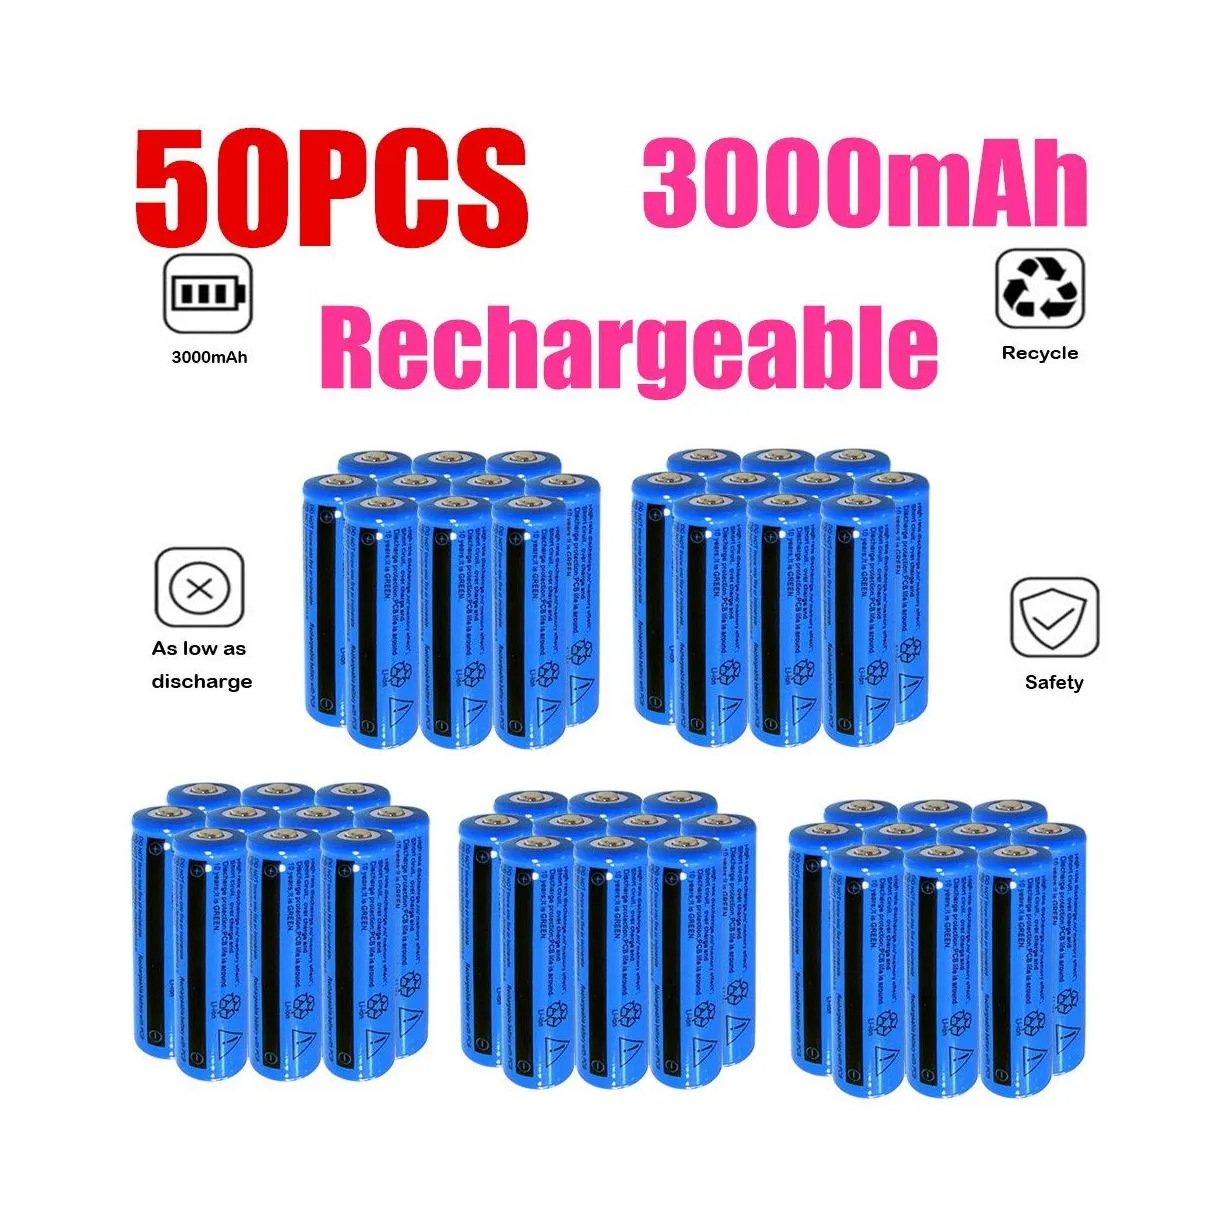 Batteries 50Pcs Rechargeable 3000Mah Li-Ion Batteries Battery 3.7V 11.1W Brc Not Aaa Or Aa For Flashlight Drop Delivery Electronics Ba Dhoa7